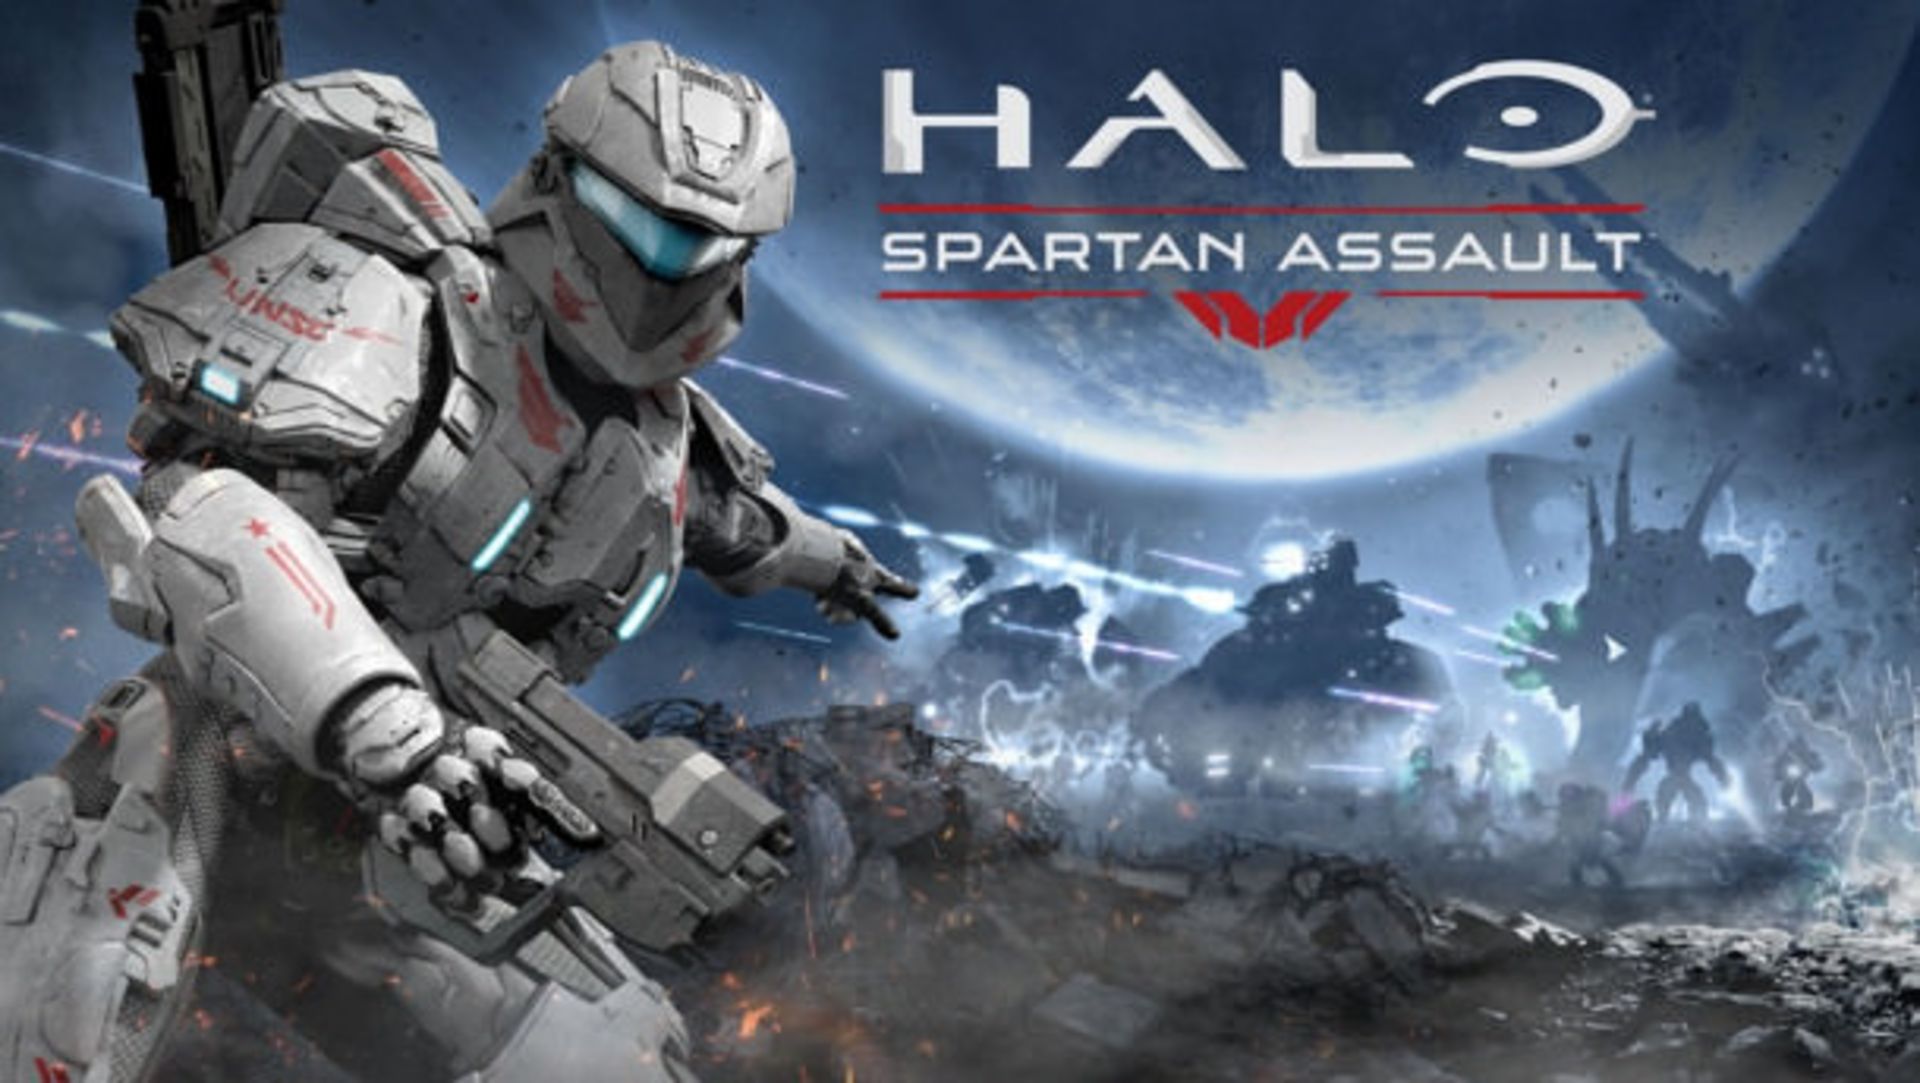 a-new-game-from-the-popular-halo-series-is-coming-to-windows-8 1